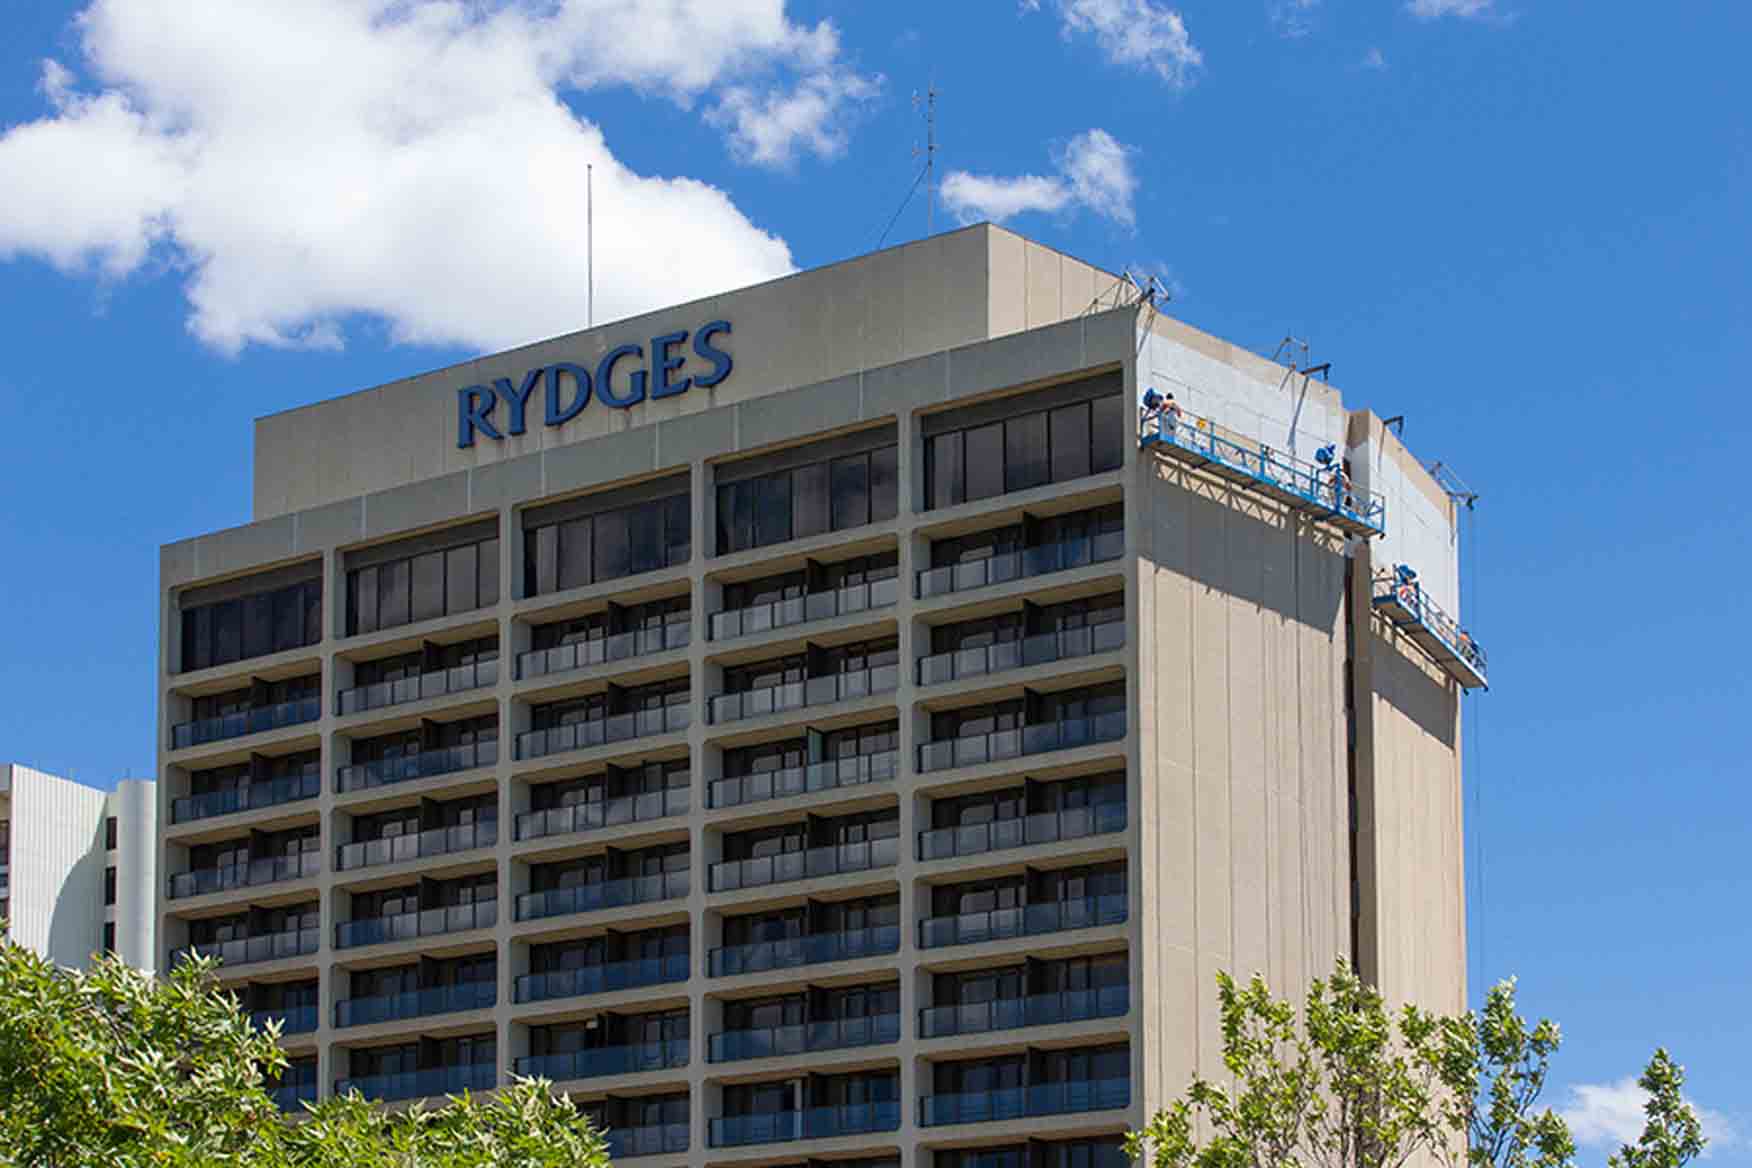 Rydges Canberra Low Resolution (8 of 10).jpg